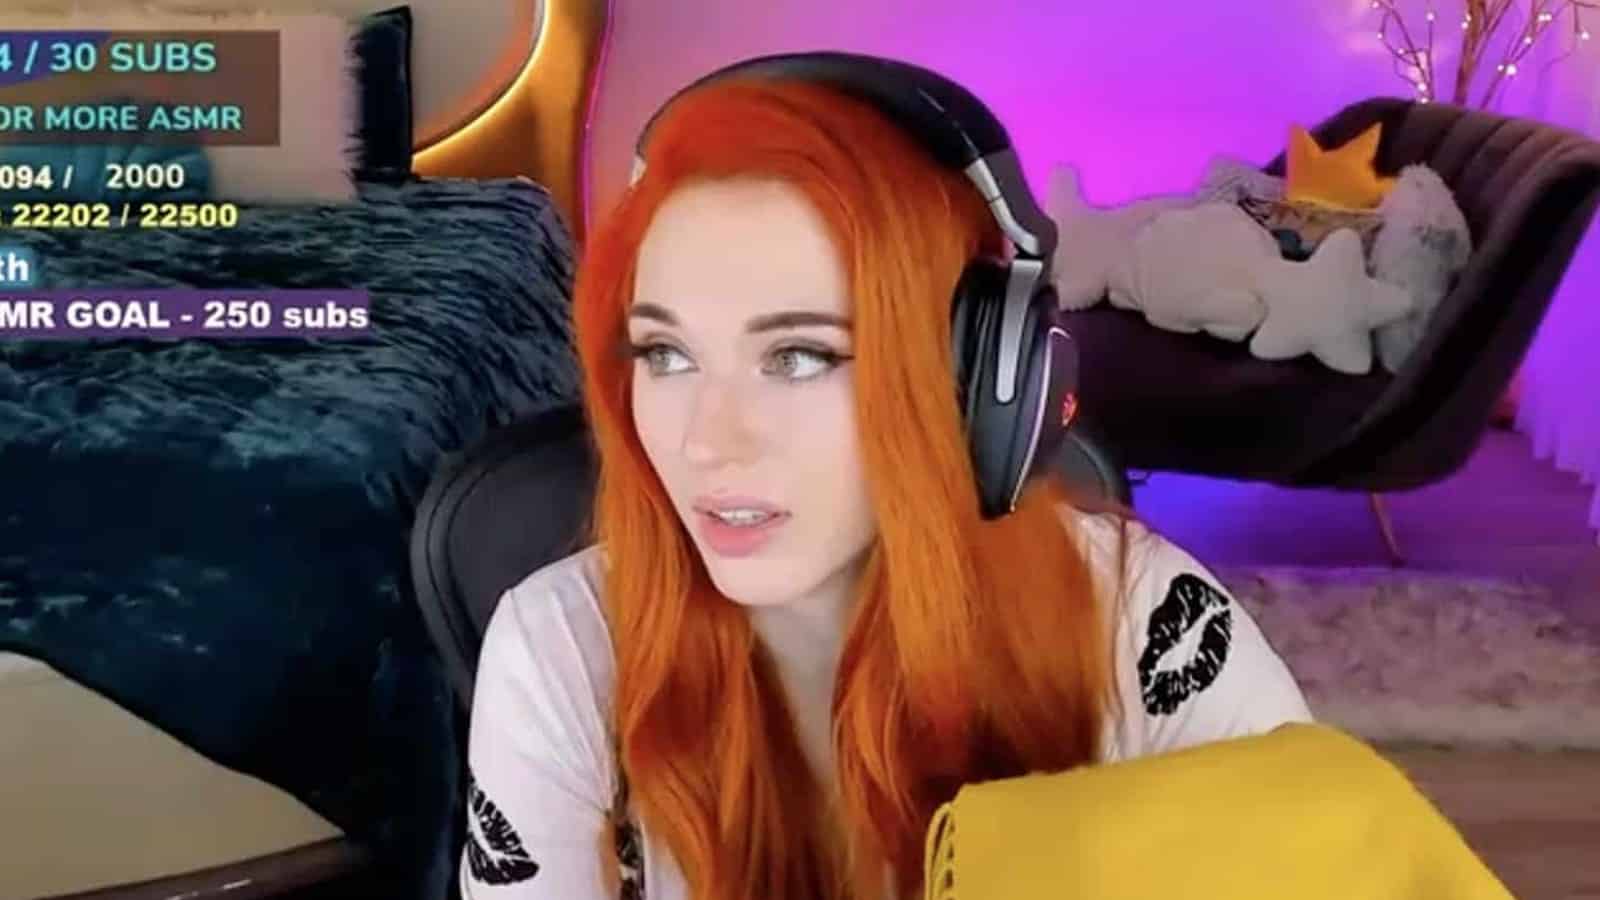 Amouranth streaming on Twitch